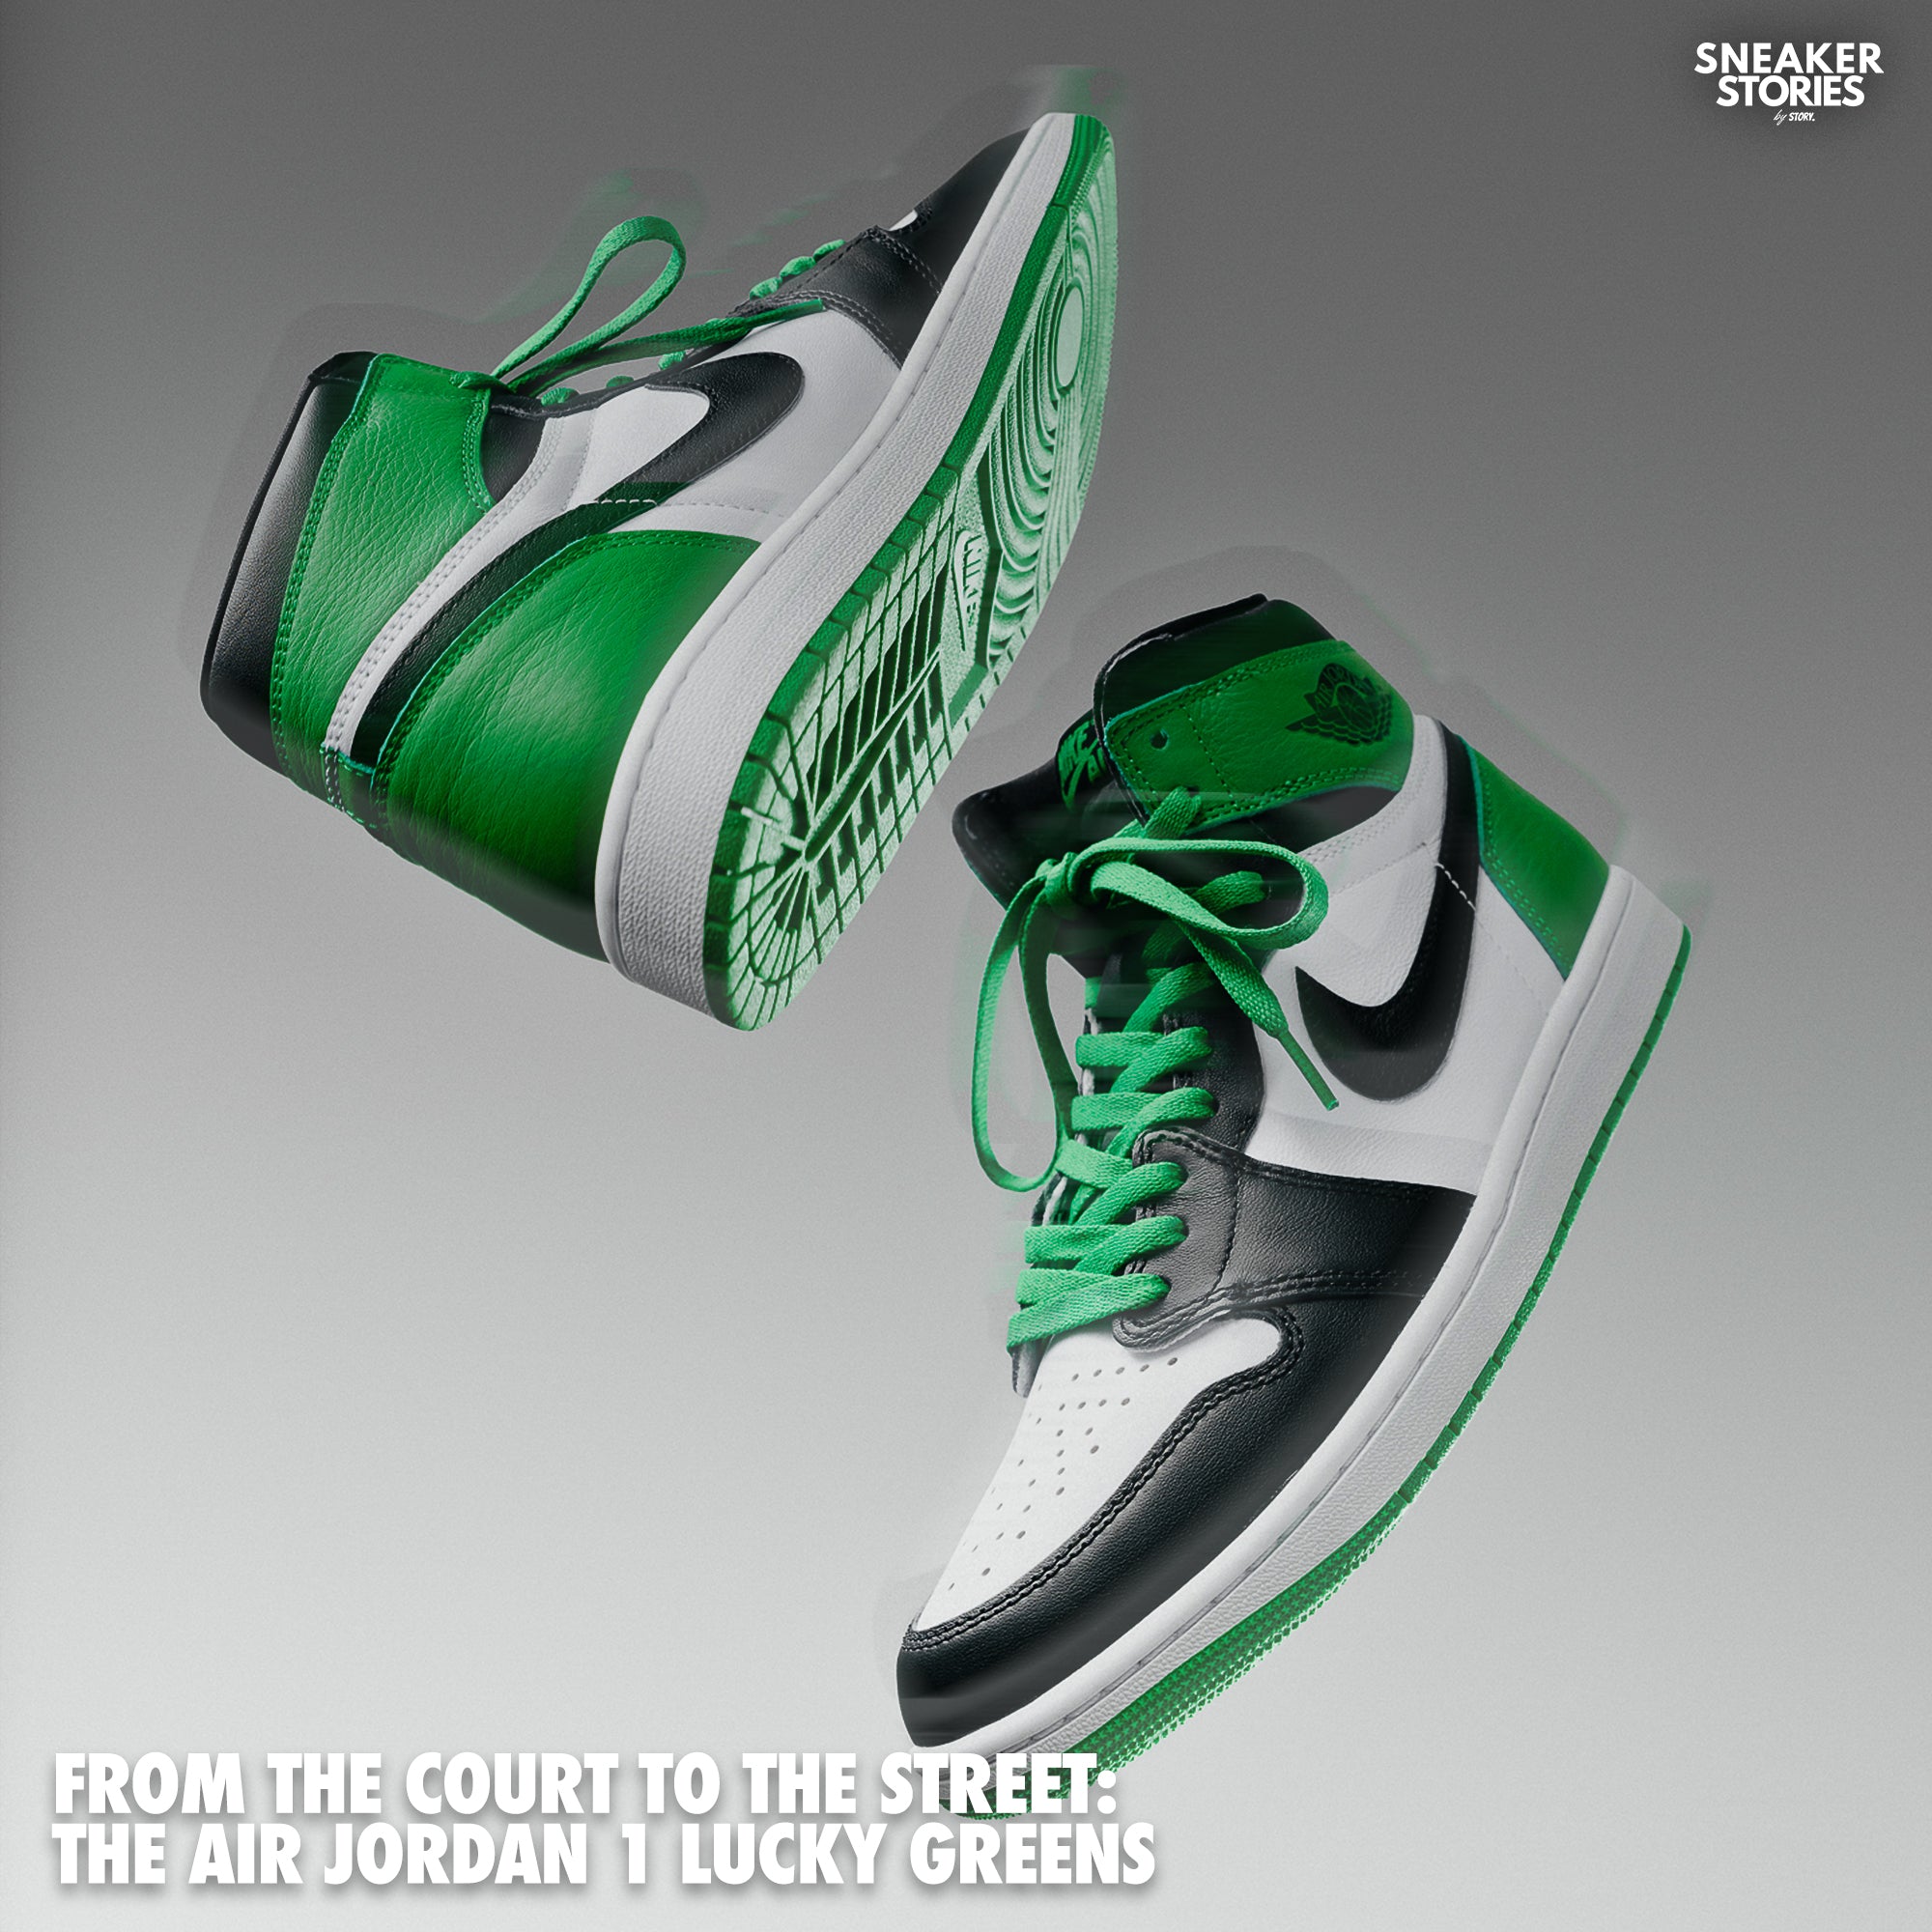 From the Court to the Street: The Air Jordan 1 Lucky Greens